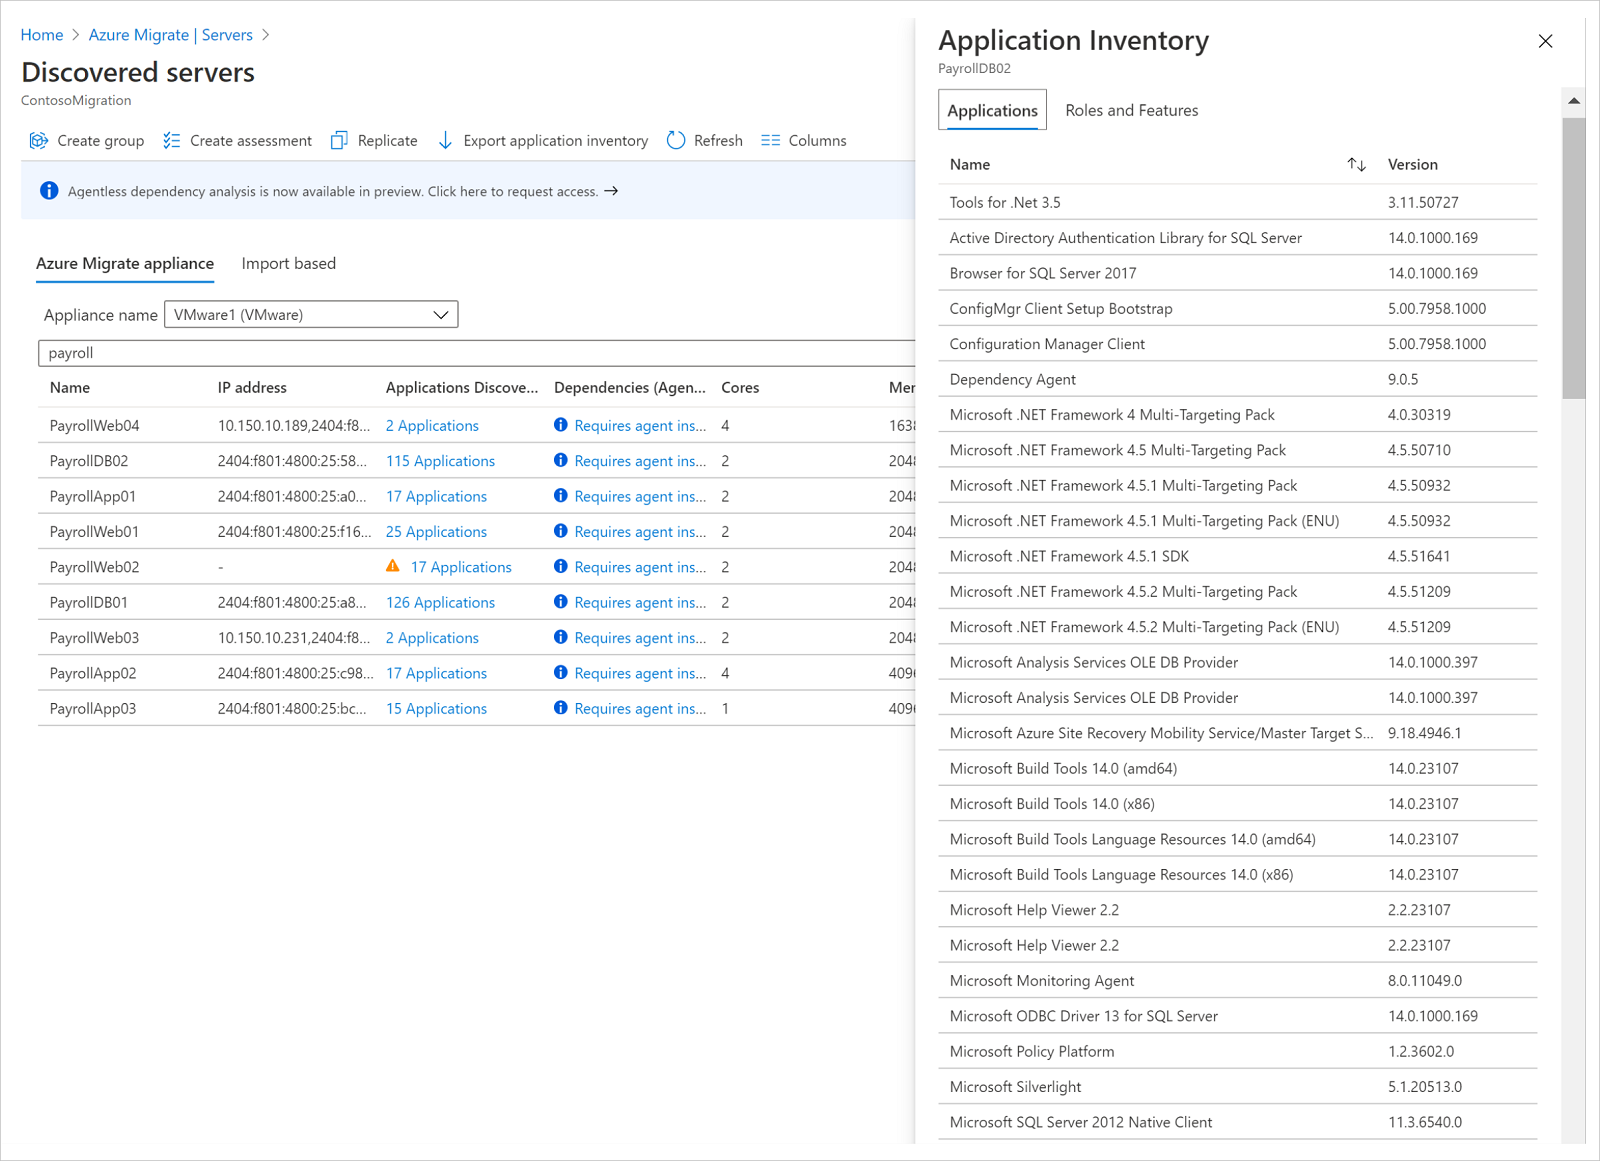 Application inventory on Portal